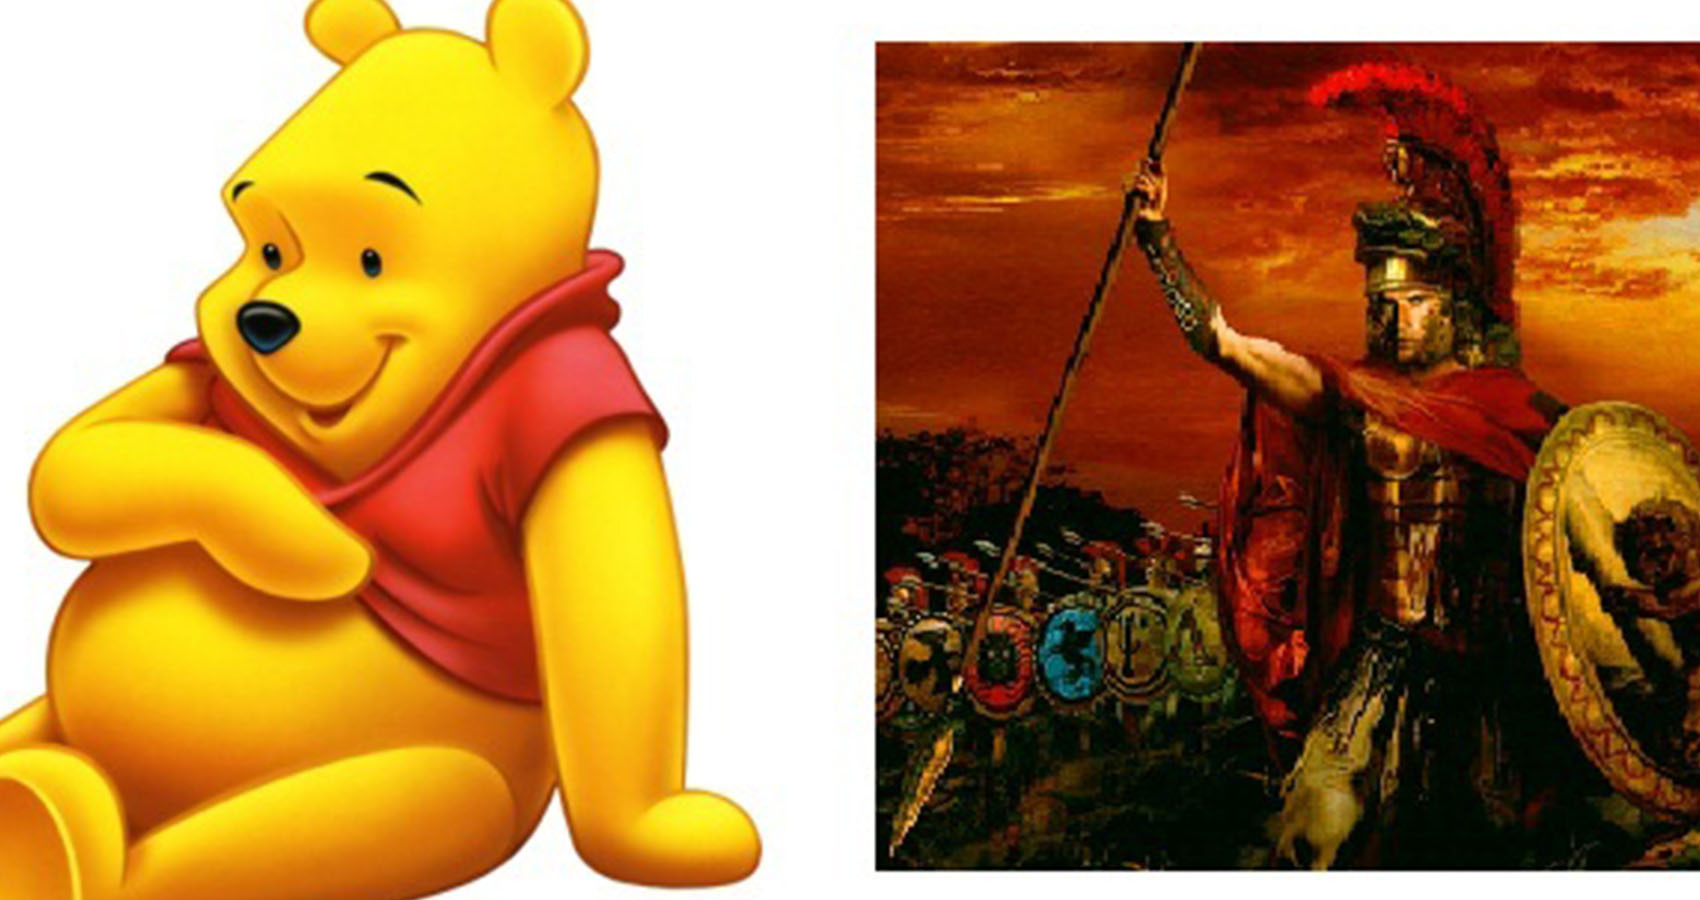 dad jokes - alexander the great and winnie the pooh -